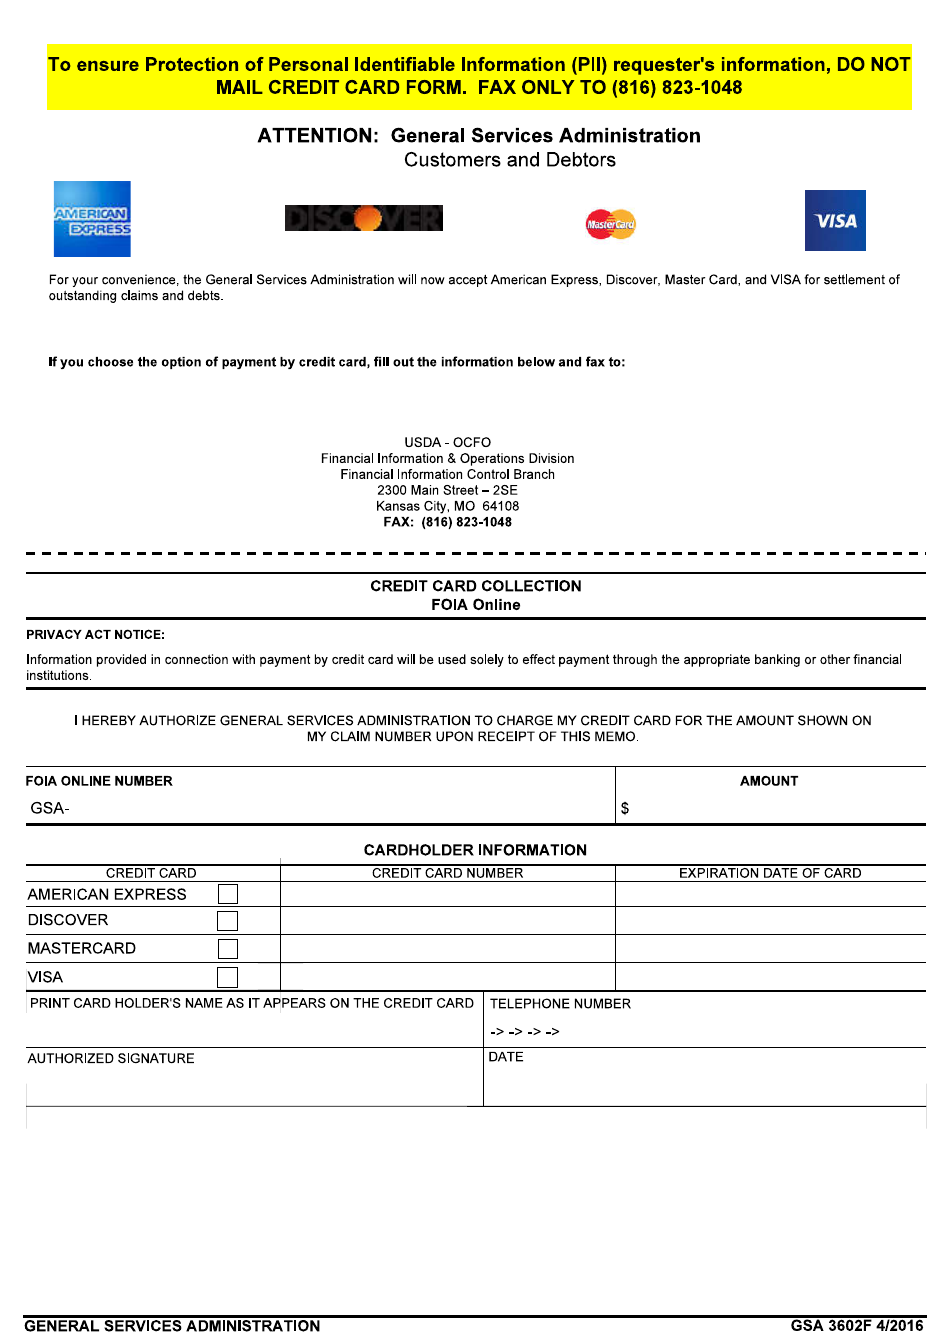 GSA Form 3602F Credit Card Collection - Foia Online, Page 1